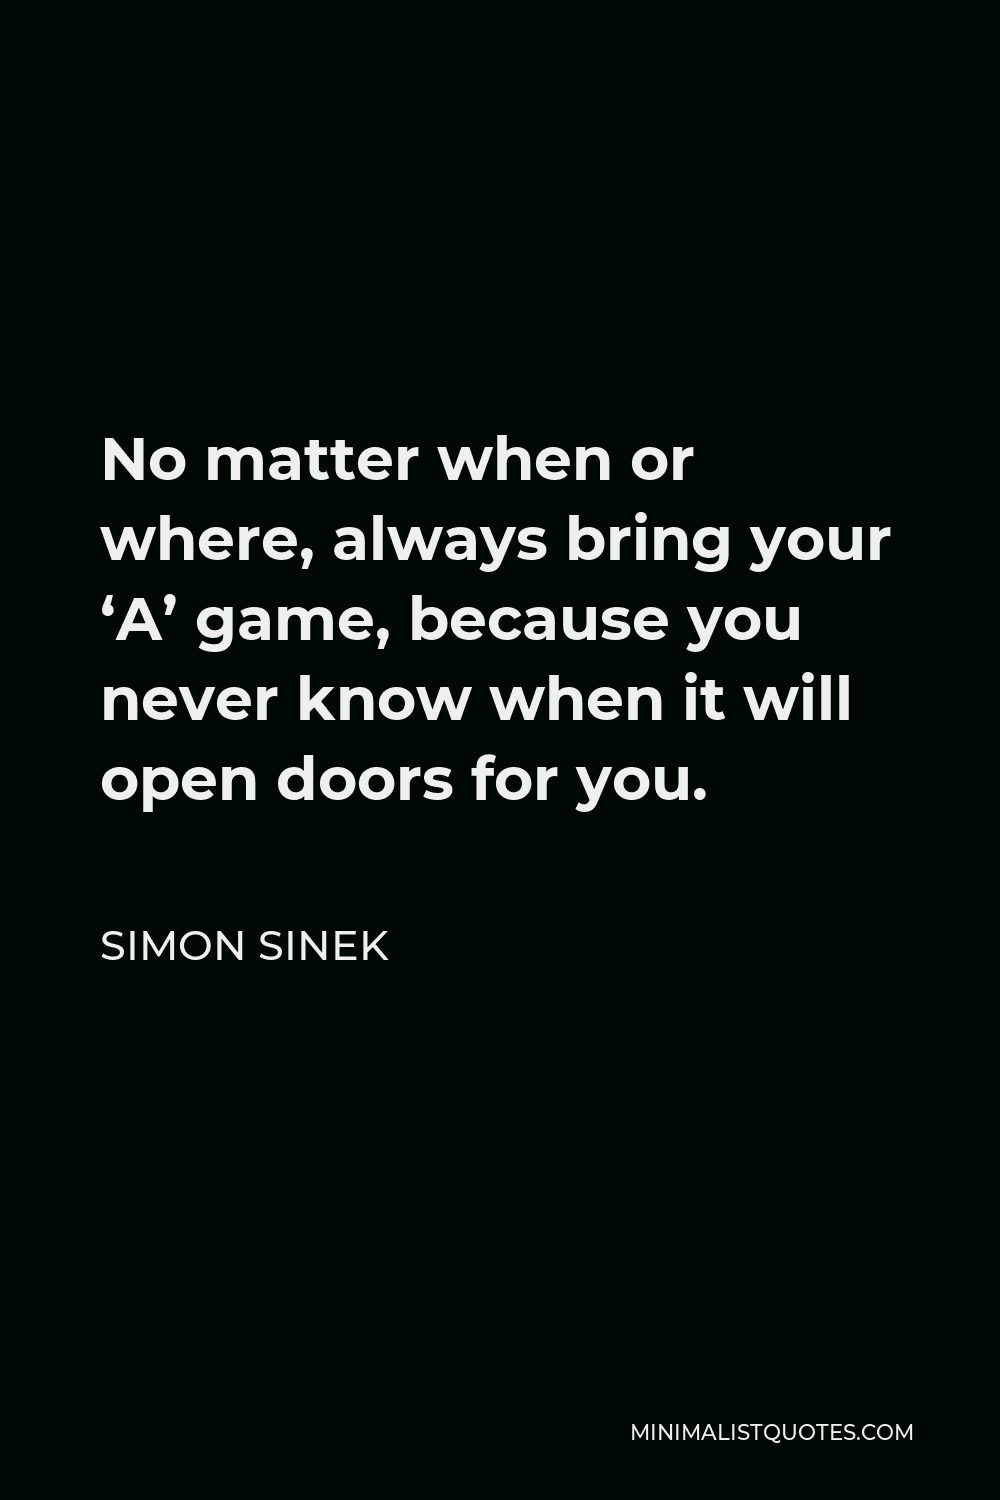 Simon Sinek Quote - No matter when or where, always bring your ‘A’ game, because you never know when it will open doors for you.